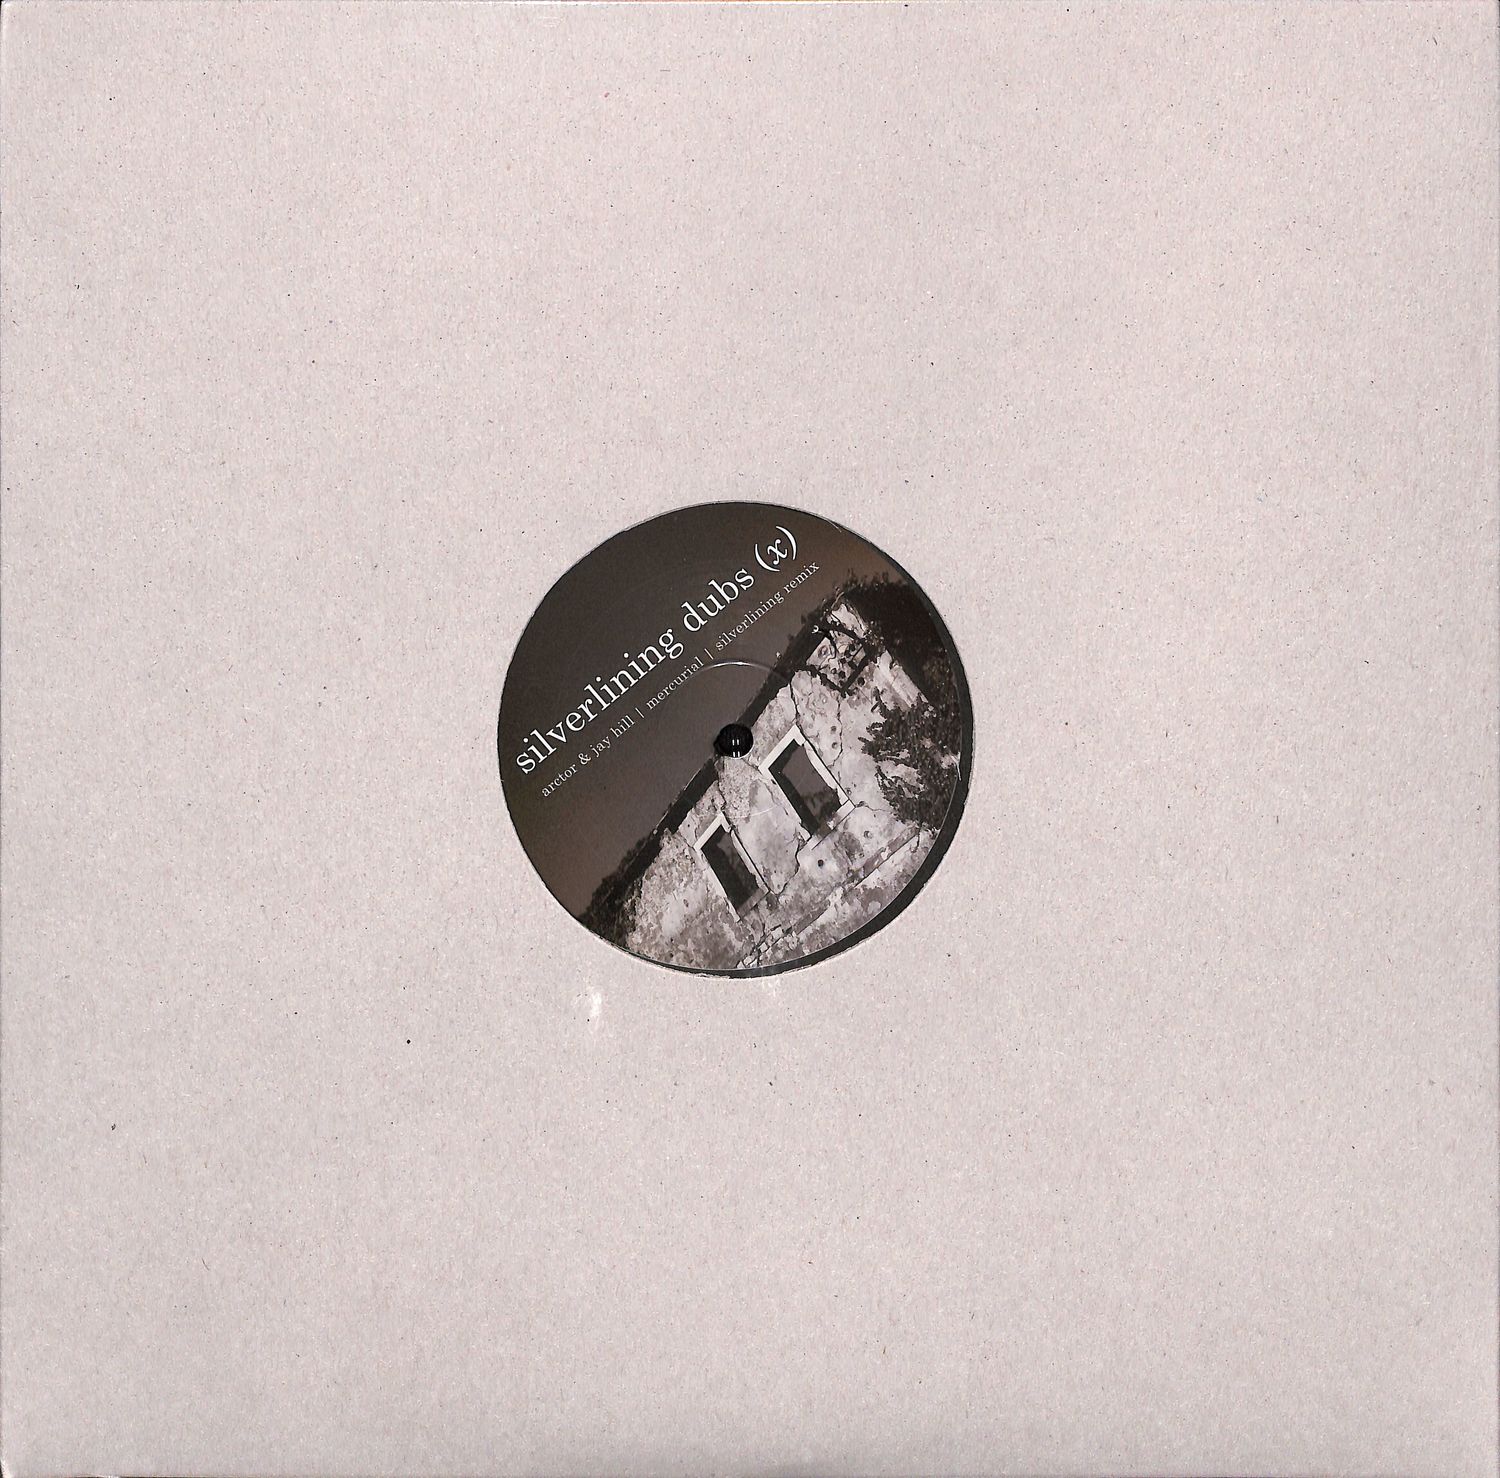 Arctor / Jay Hill / Ravi Mcarthur / Spook In The House - SILVERLINING DUBS 